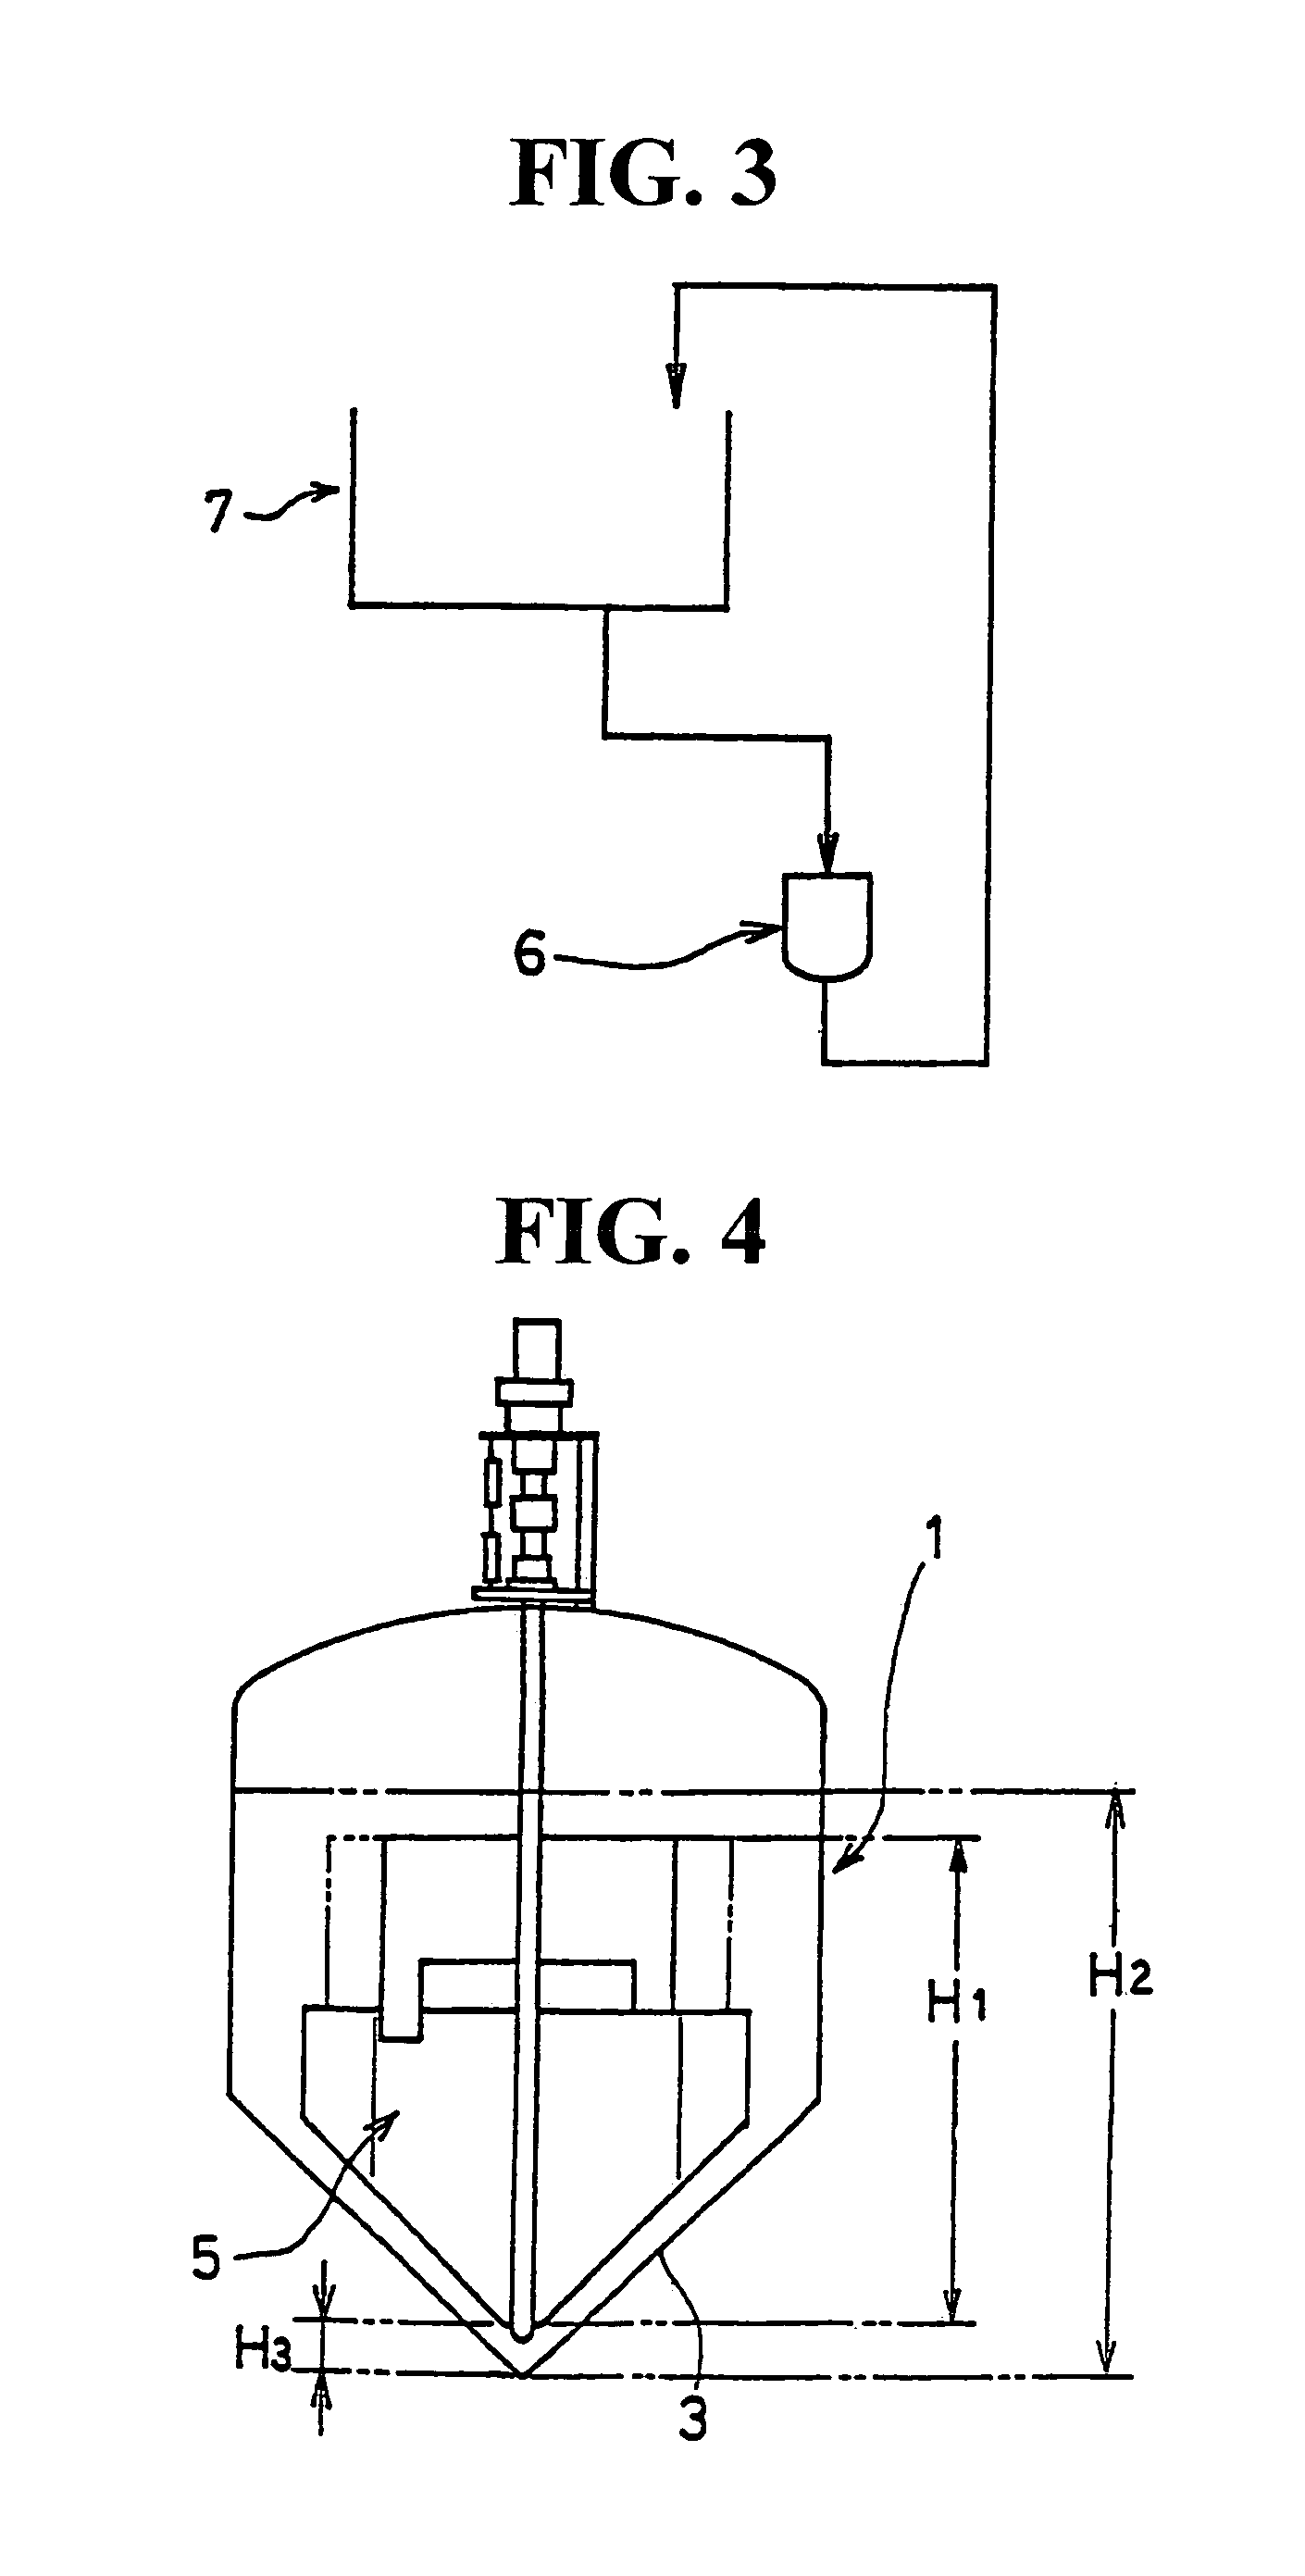 Agitation tank for storing beer yeast slurry